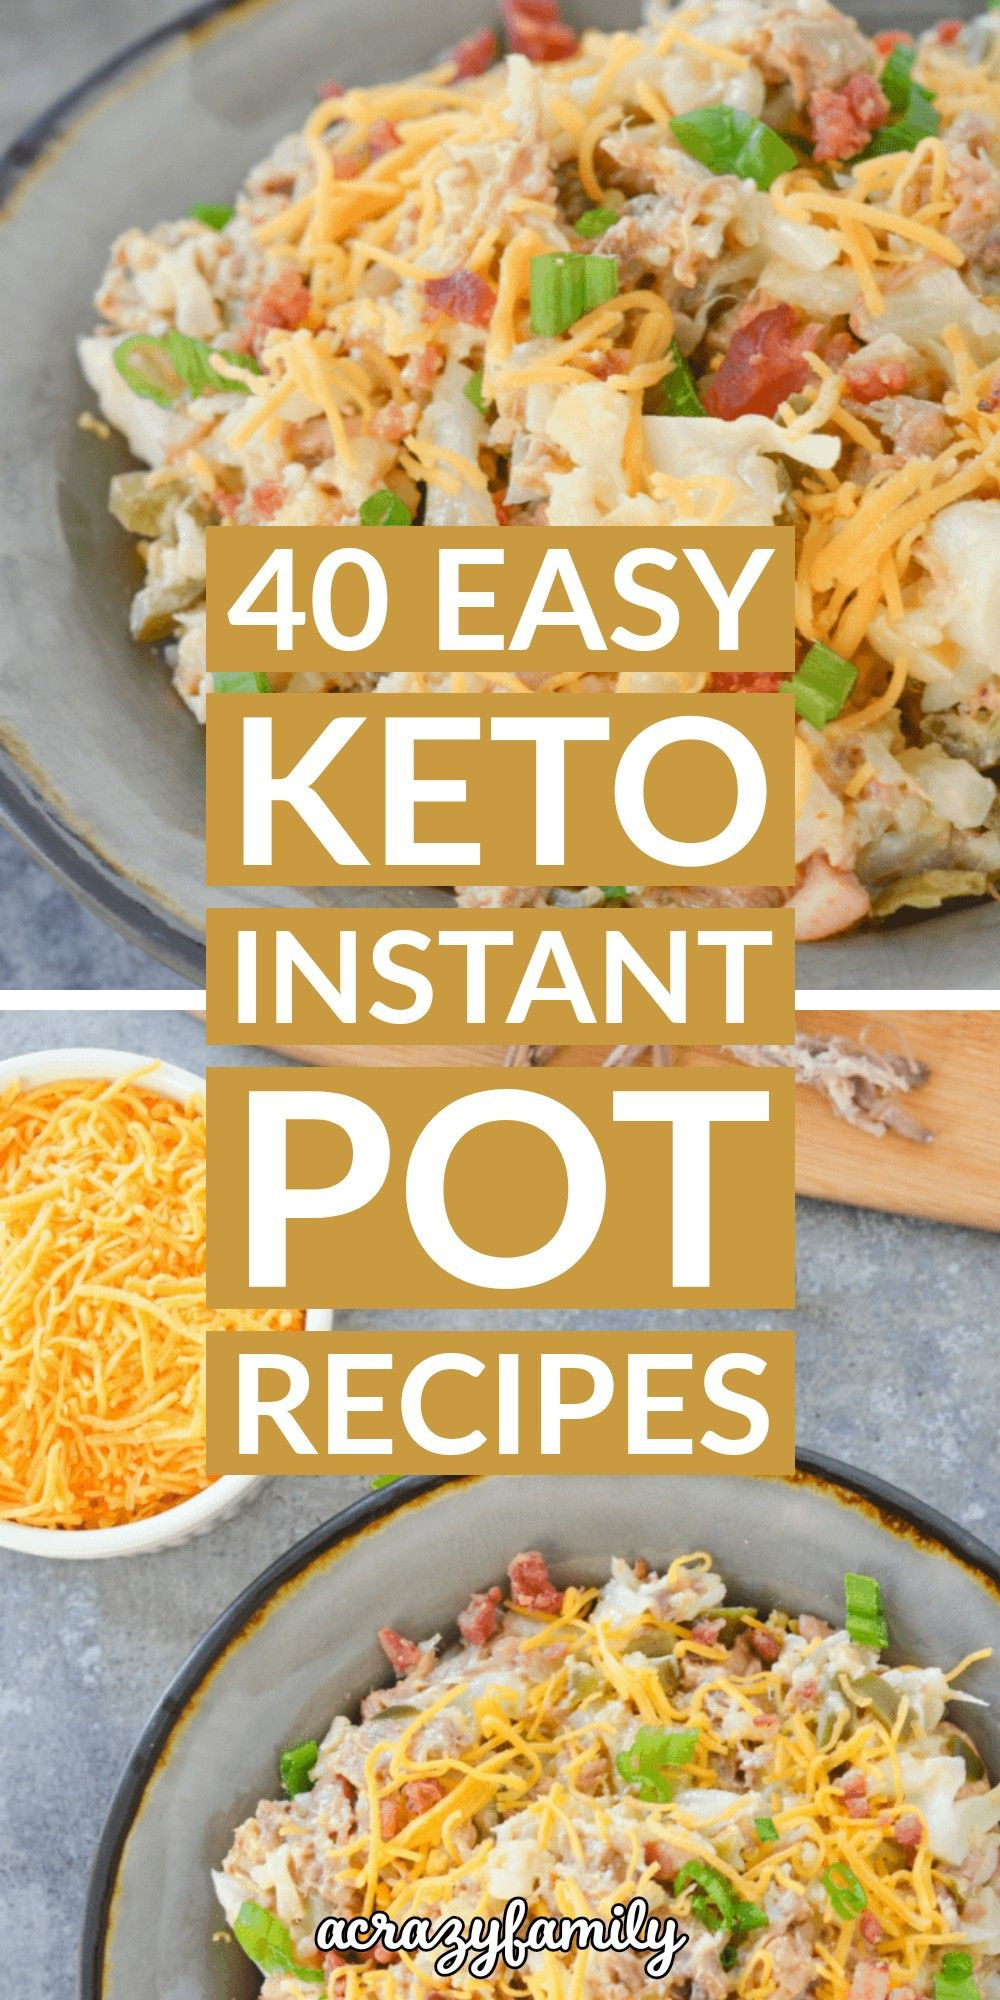 Vegetarian Keto Instant Pot
 40 Easy Instant Pot Keto Recipes You Must Try in 2020